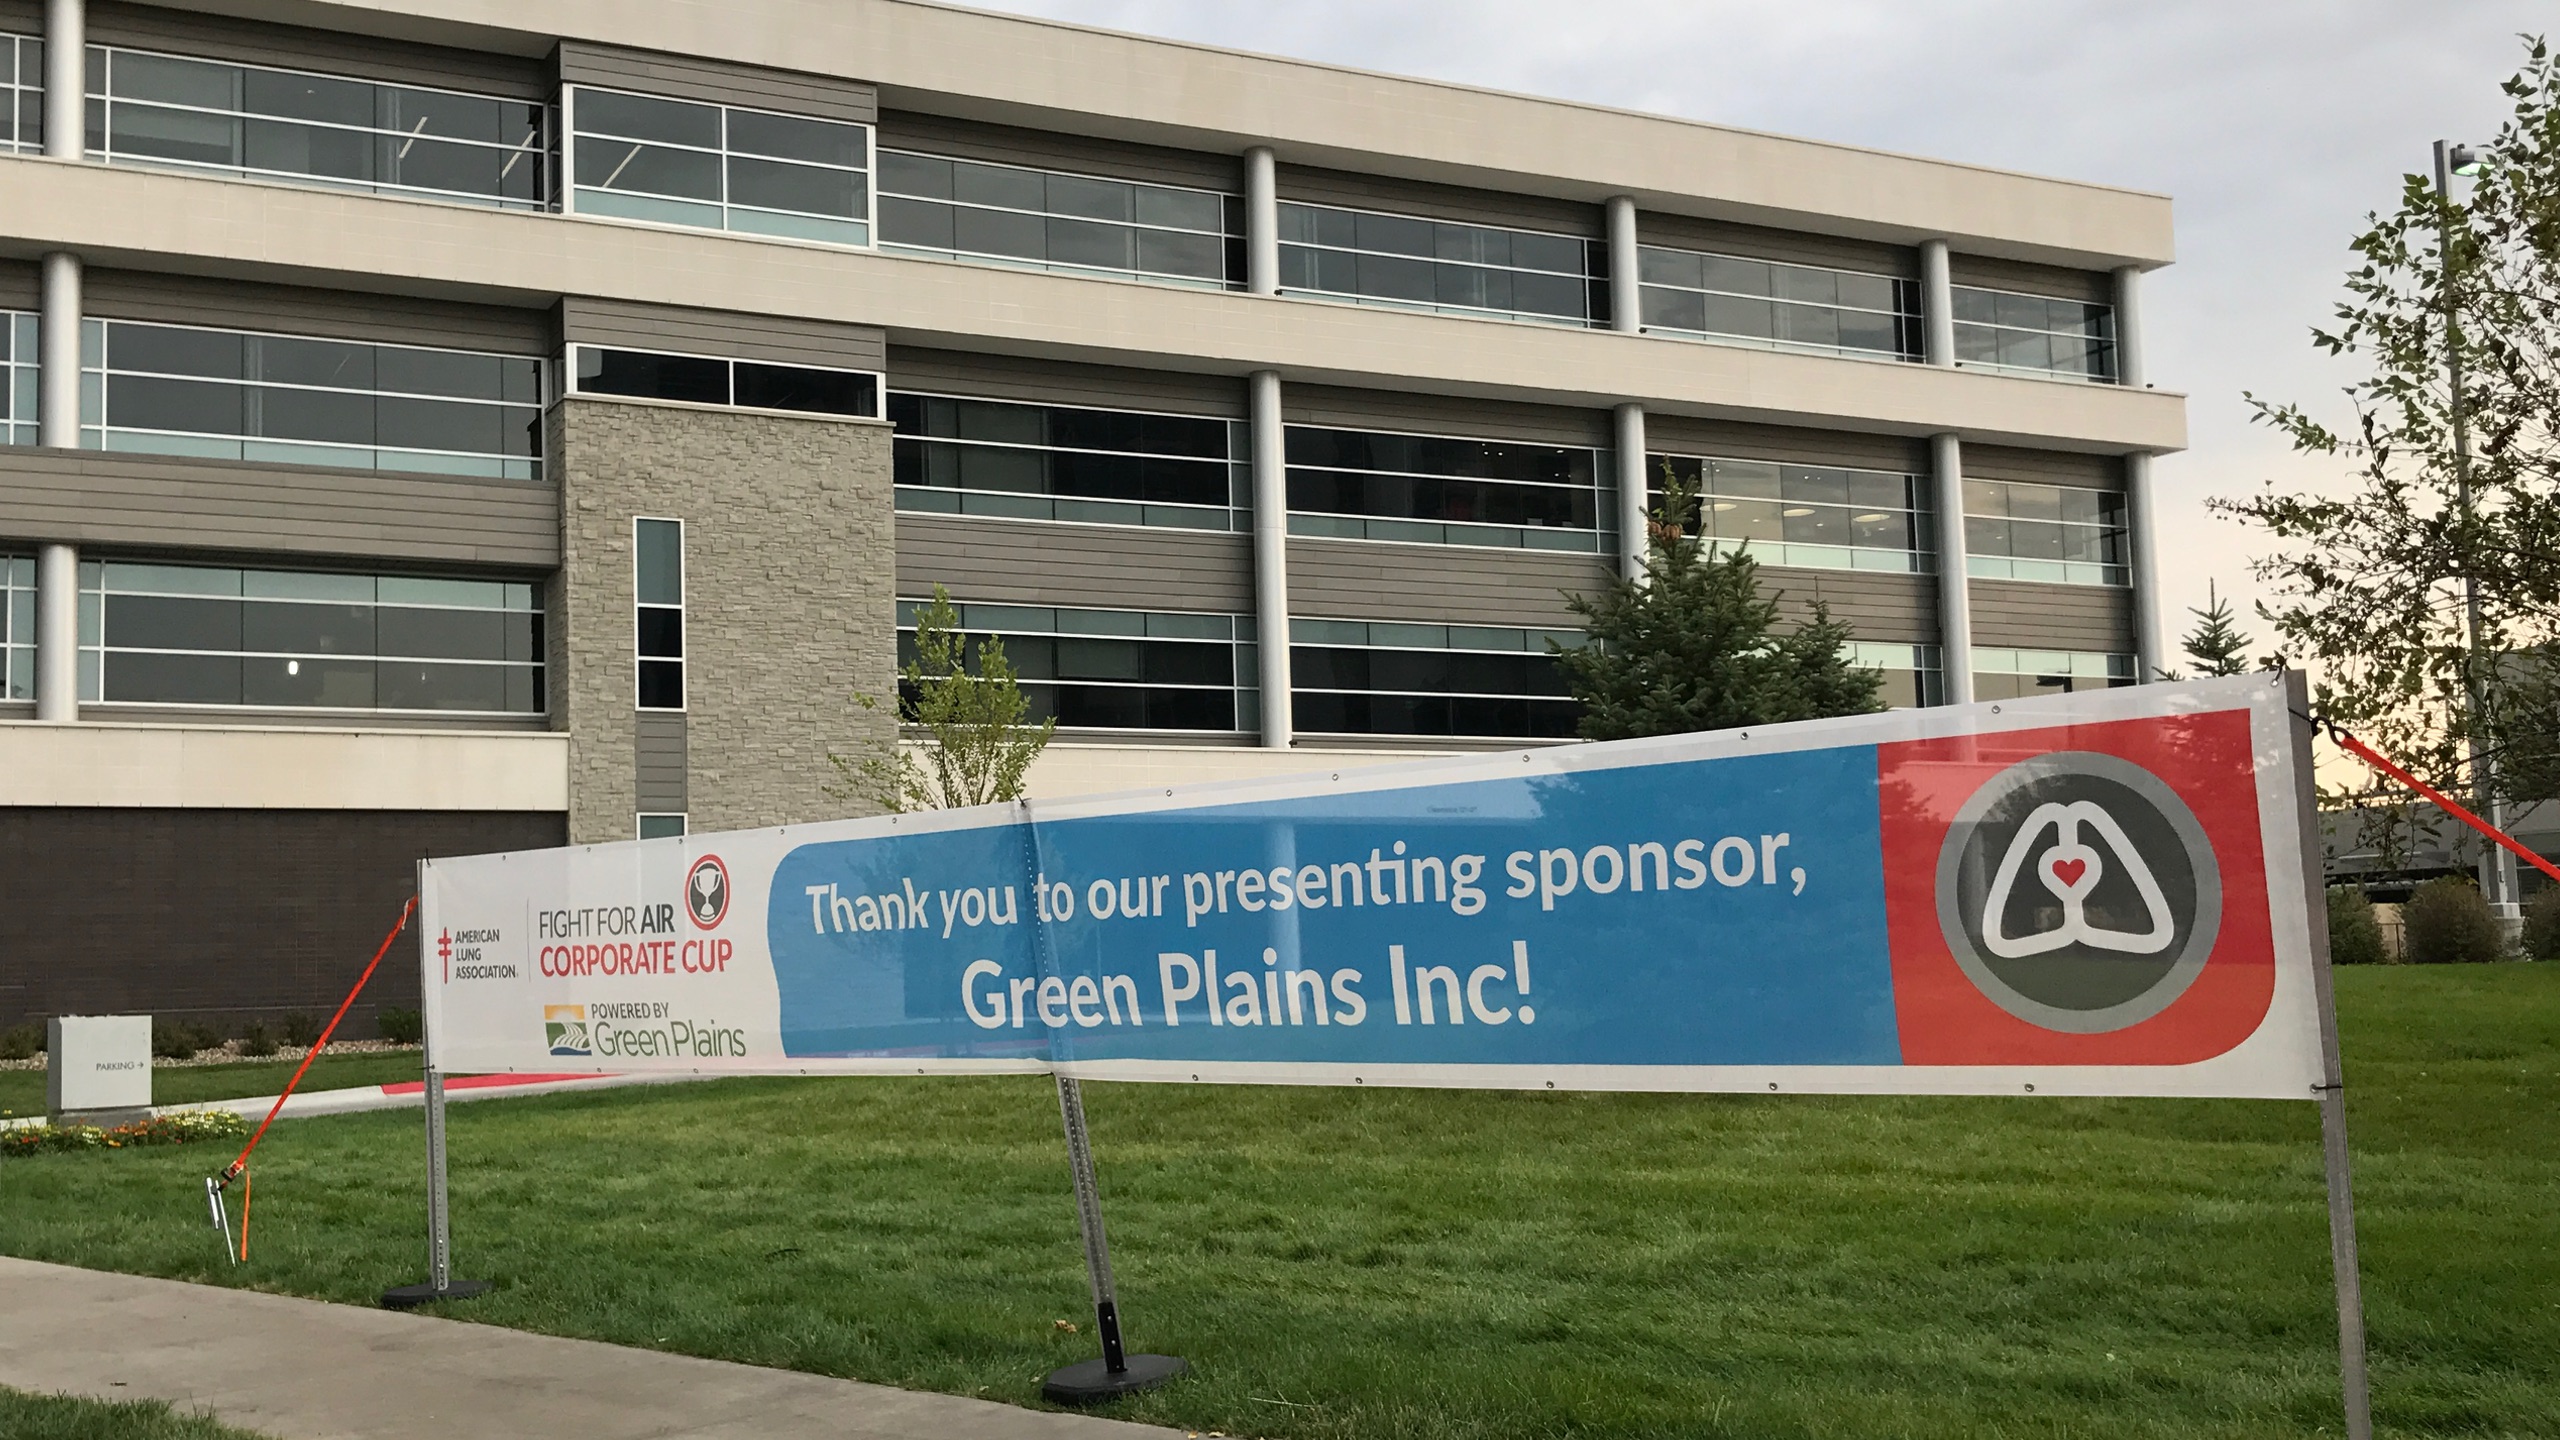 Corporate Cup Sponsorship banner outside of the Green Plains Corporate Headquarters